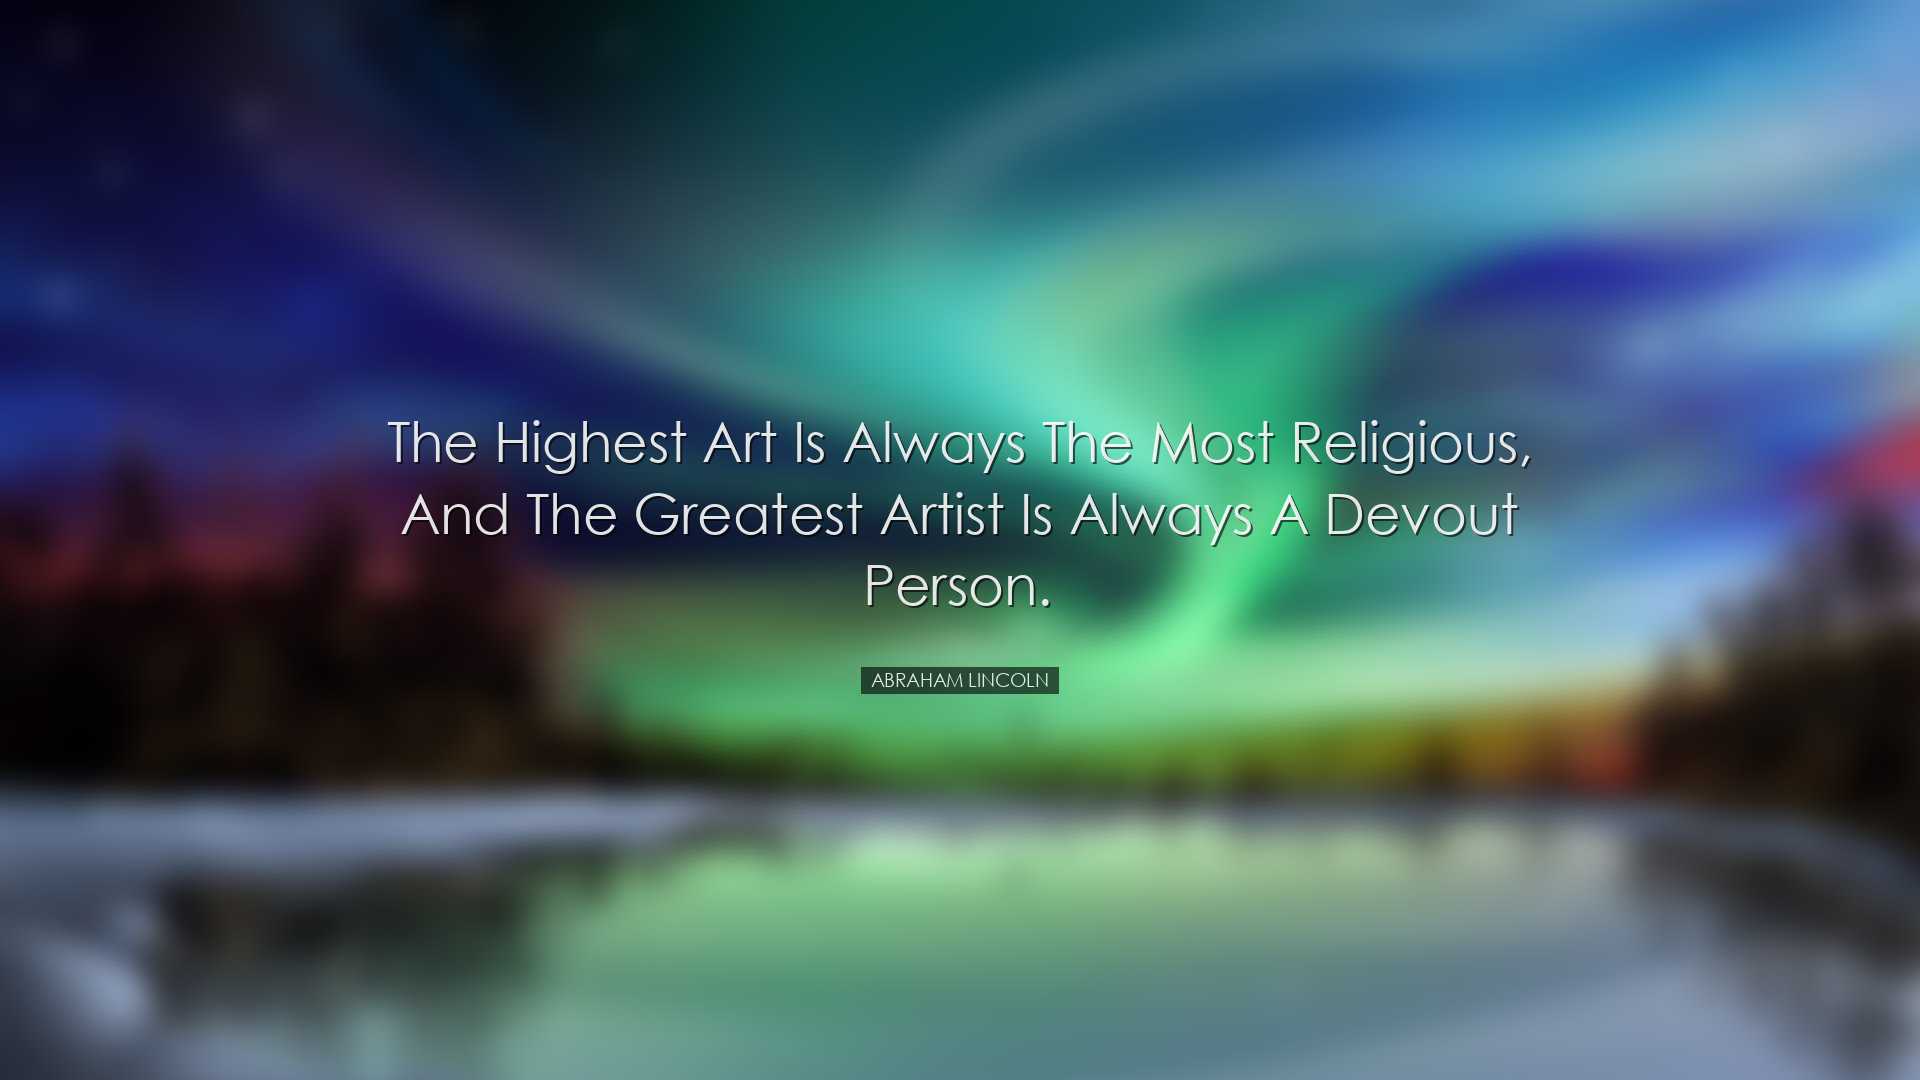 The highest art is always the most religious, and the greatest art